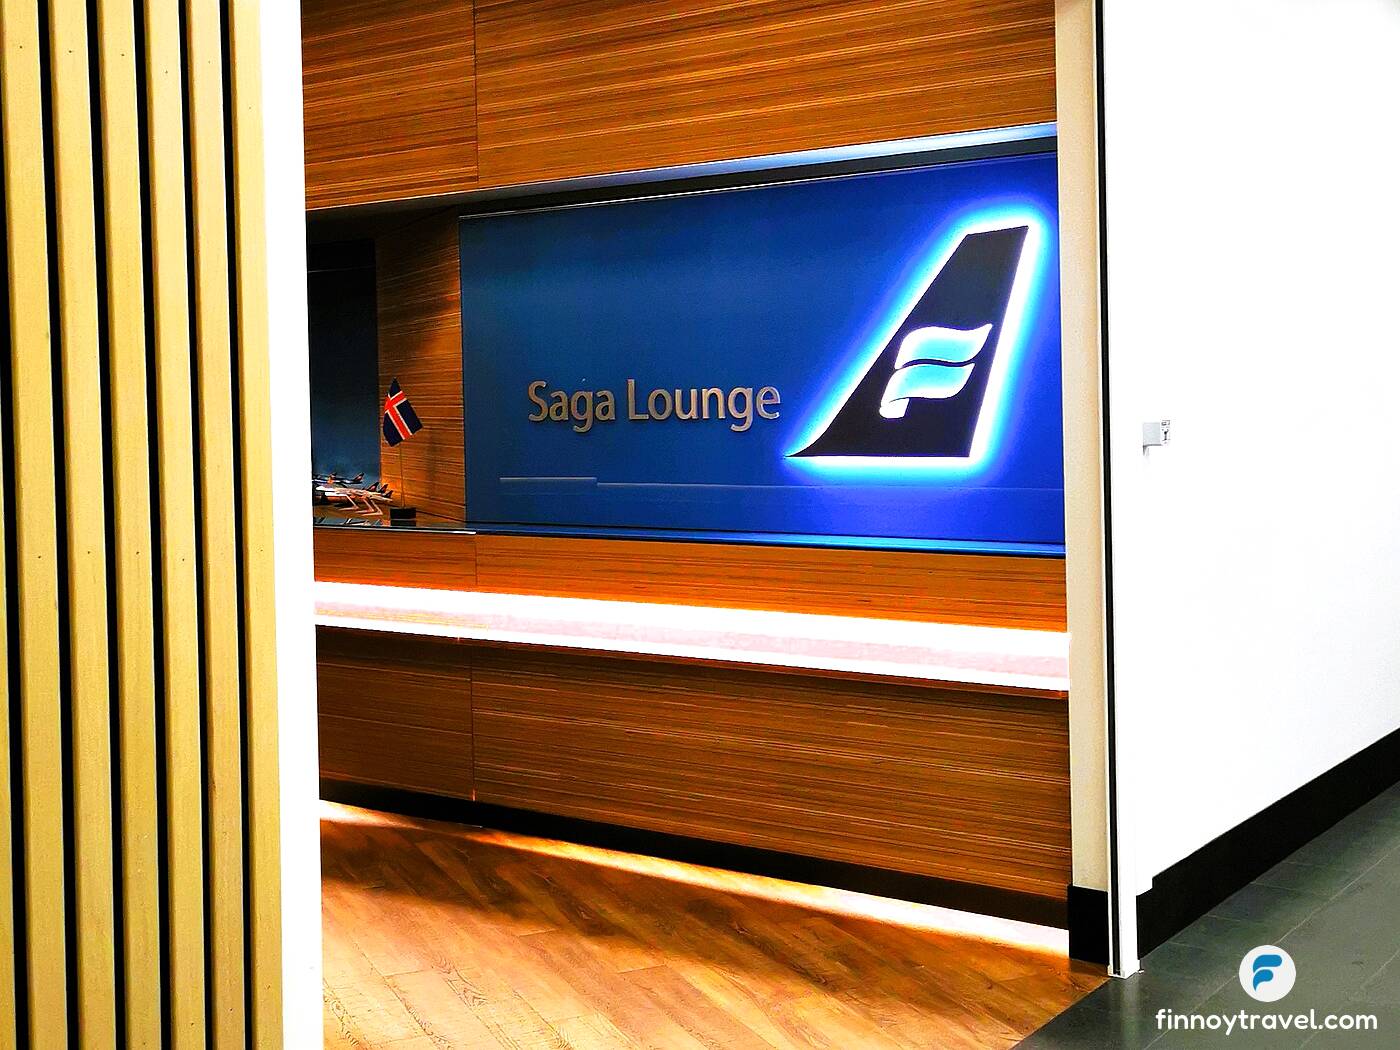 The entrance to Saga Lounge with the company logo of the lounge in the background.